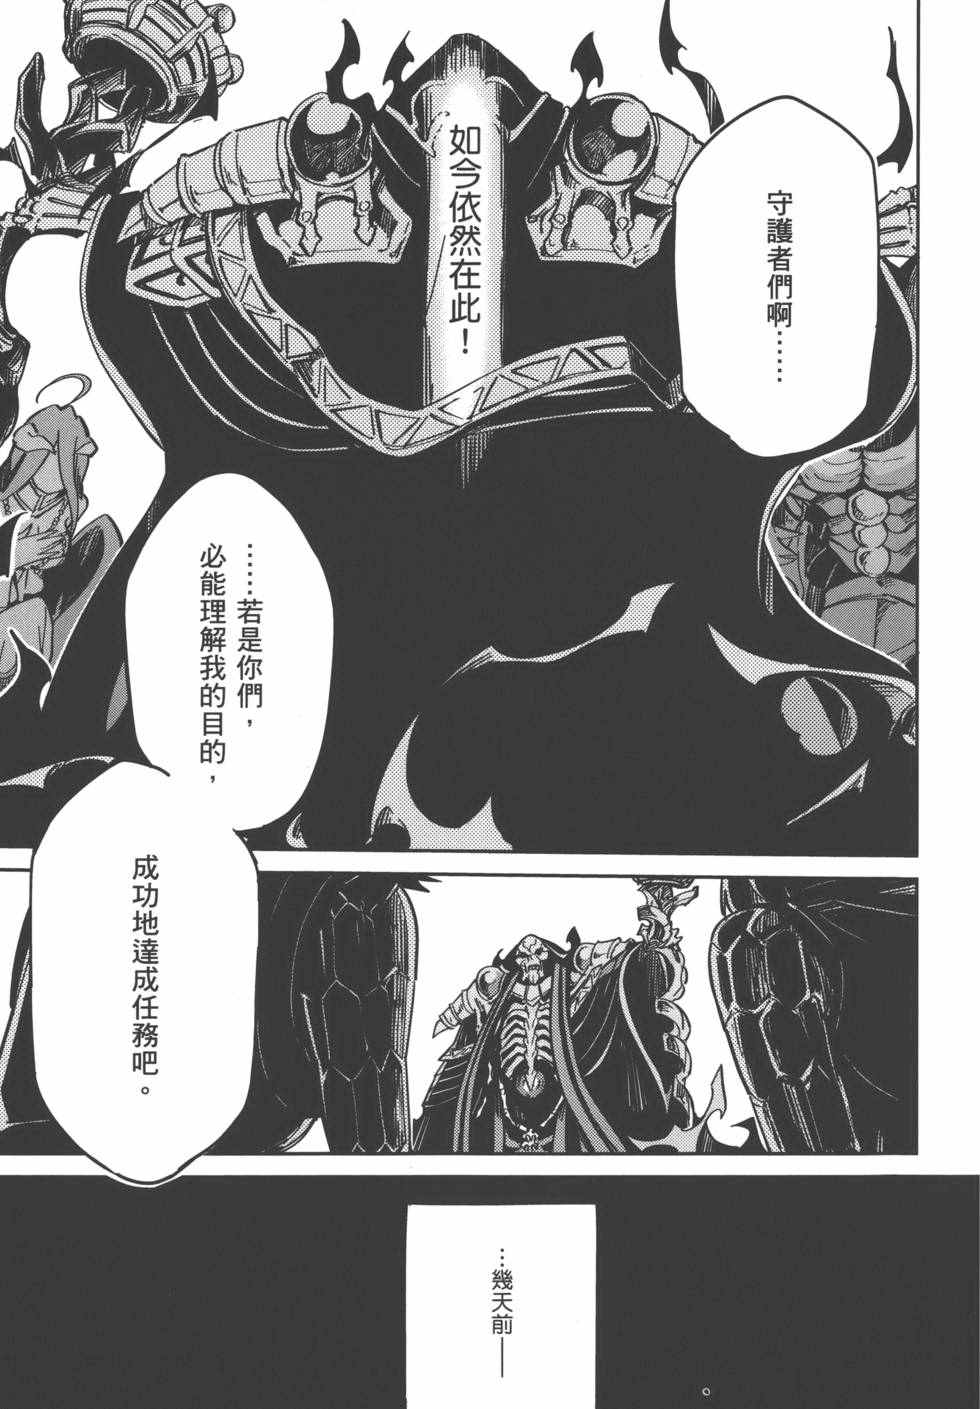 OVERLORD - 第1卷(2/4) - 5